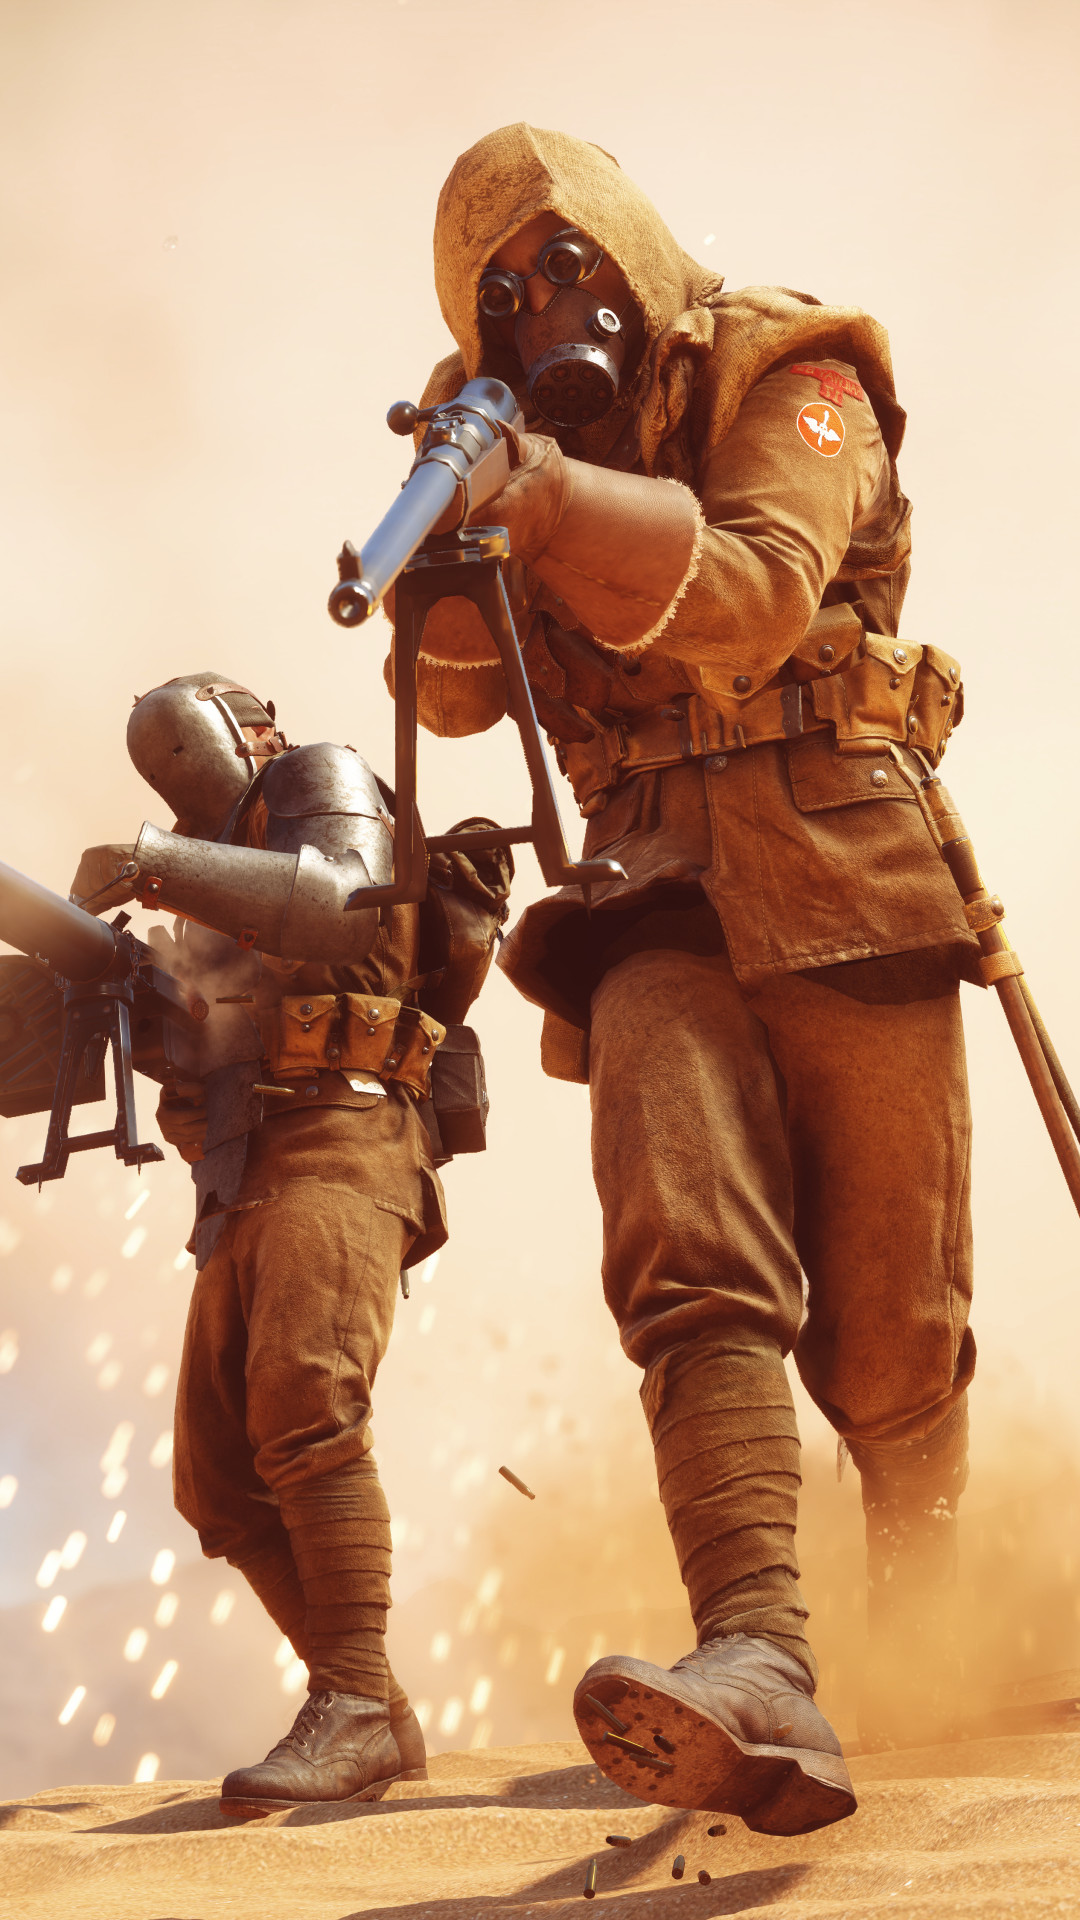 1080x1920 Download this Wallpaper iPhone 5S - Video Game/Battlefield 1 ()  for all